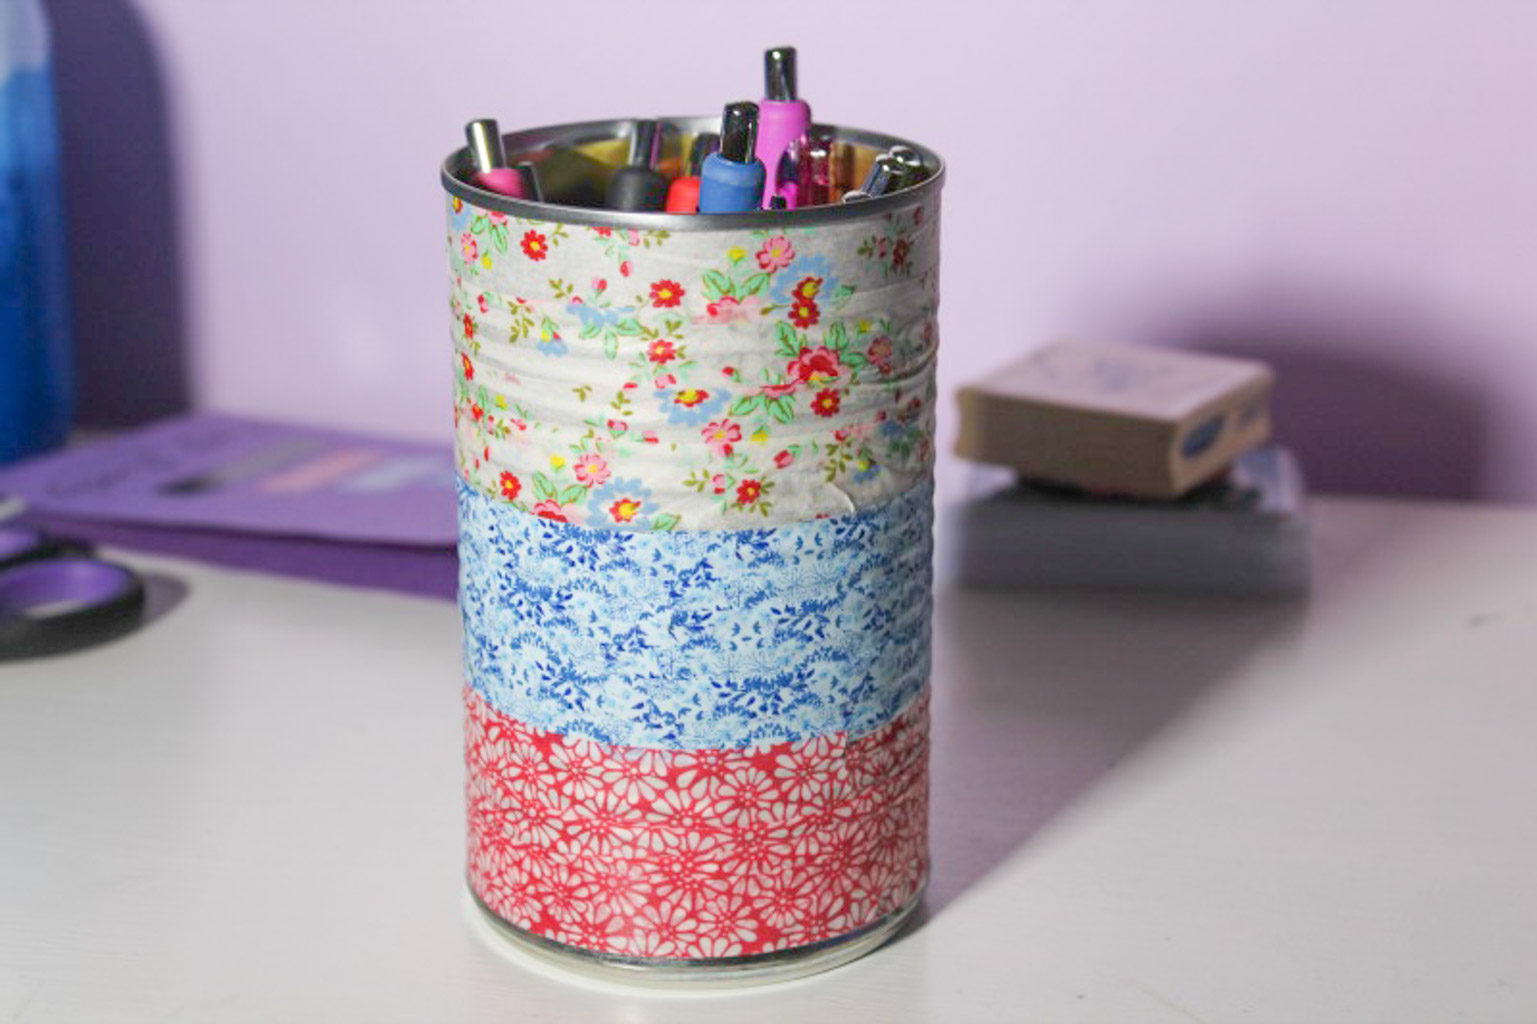 Make Your Shipments Pop with Our Colorful and Creative Washi Tape